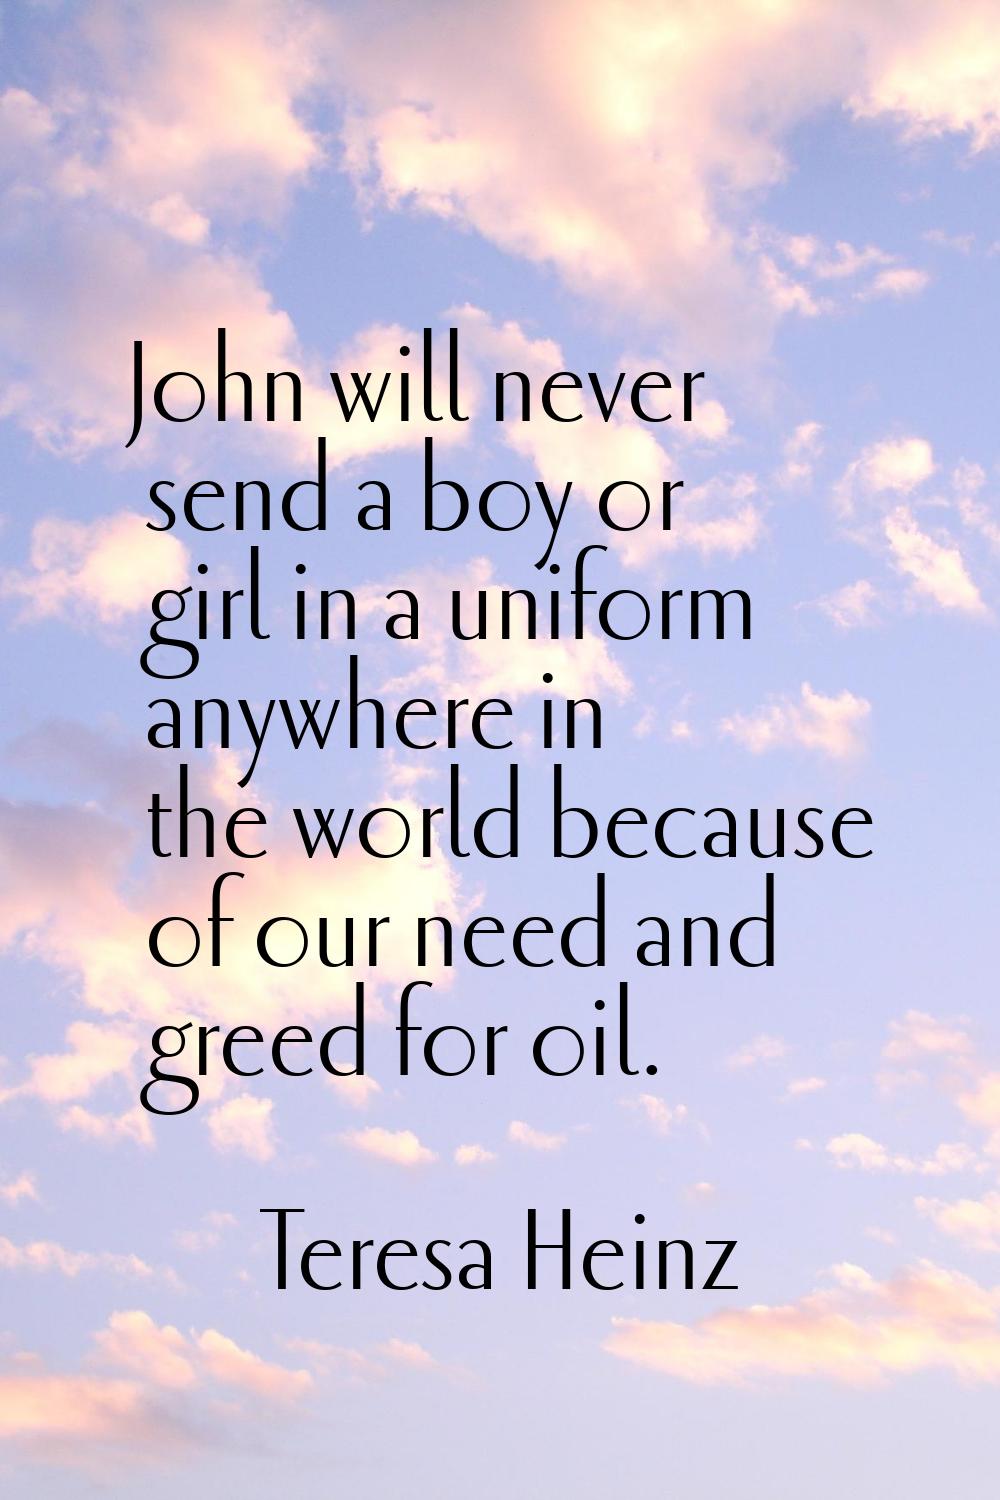 John will never send a boy or girl in a uniform anywhere in the world because of our need and greed